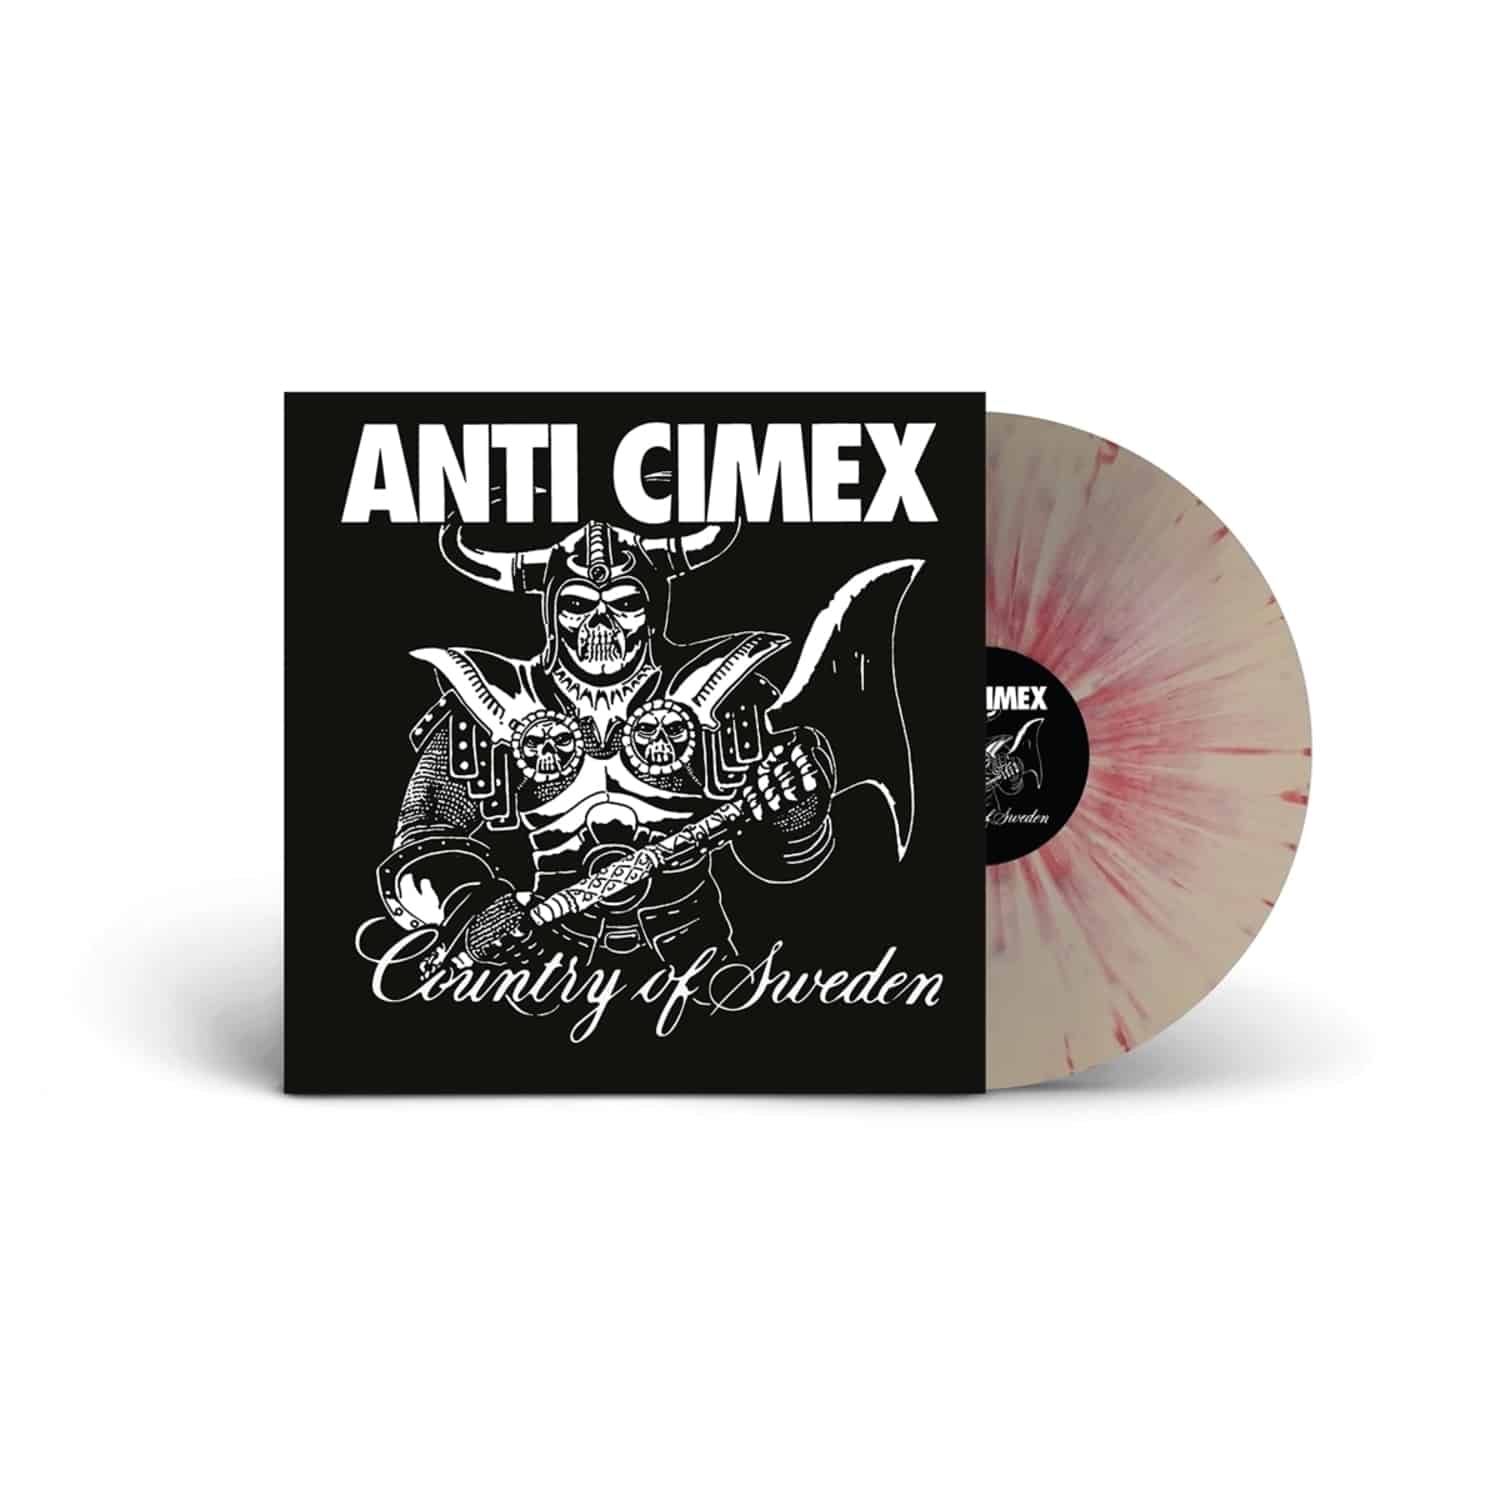 Anti Cimex - ABSOLUT COUNTRY OF SWEDEN 